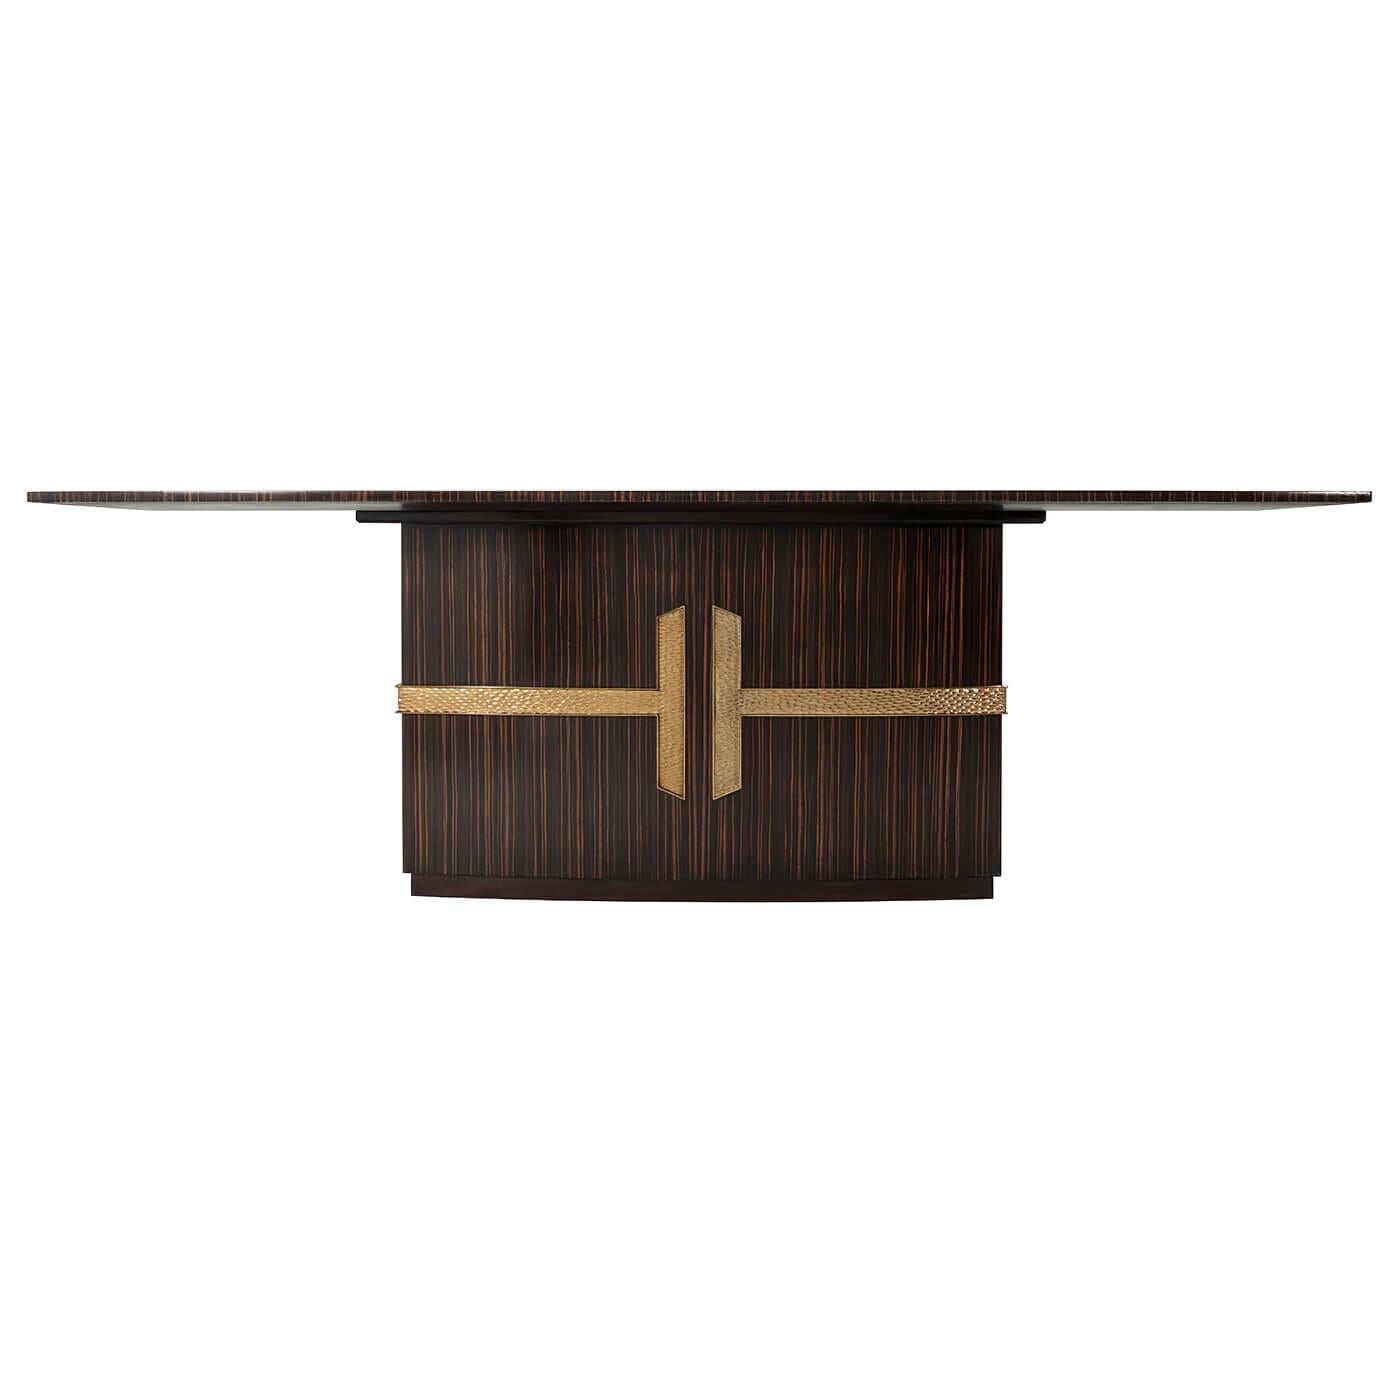 Art Deco-inspired rectangular bow sides dining table with brass line inlays, a faux ebony veneered top and base with hammered brass finish metal mounted accents.

Dimensions: 96